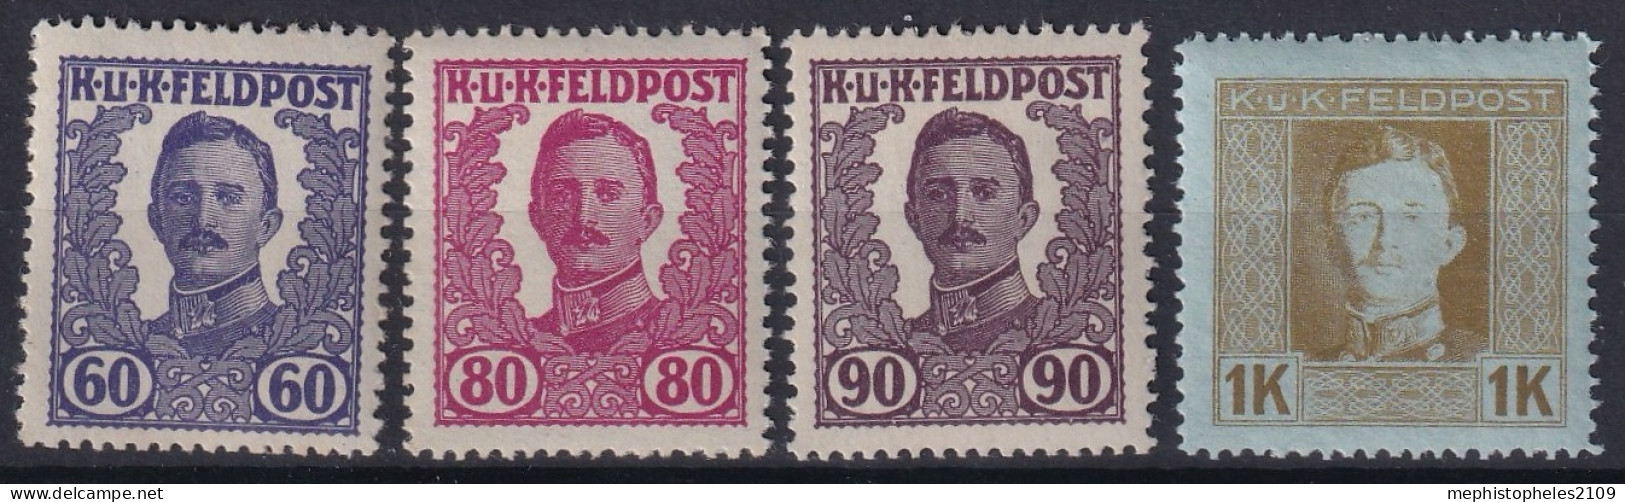 AUSTRIA 1918 - MNH - ANK XI-XiV - Not Issued - Unused Stamps